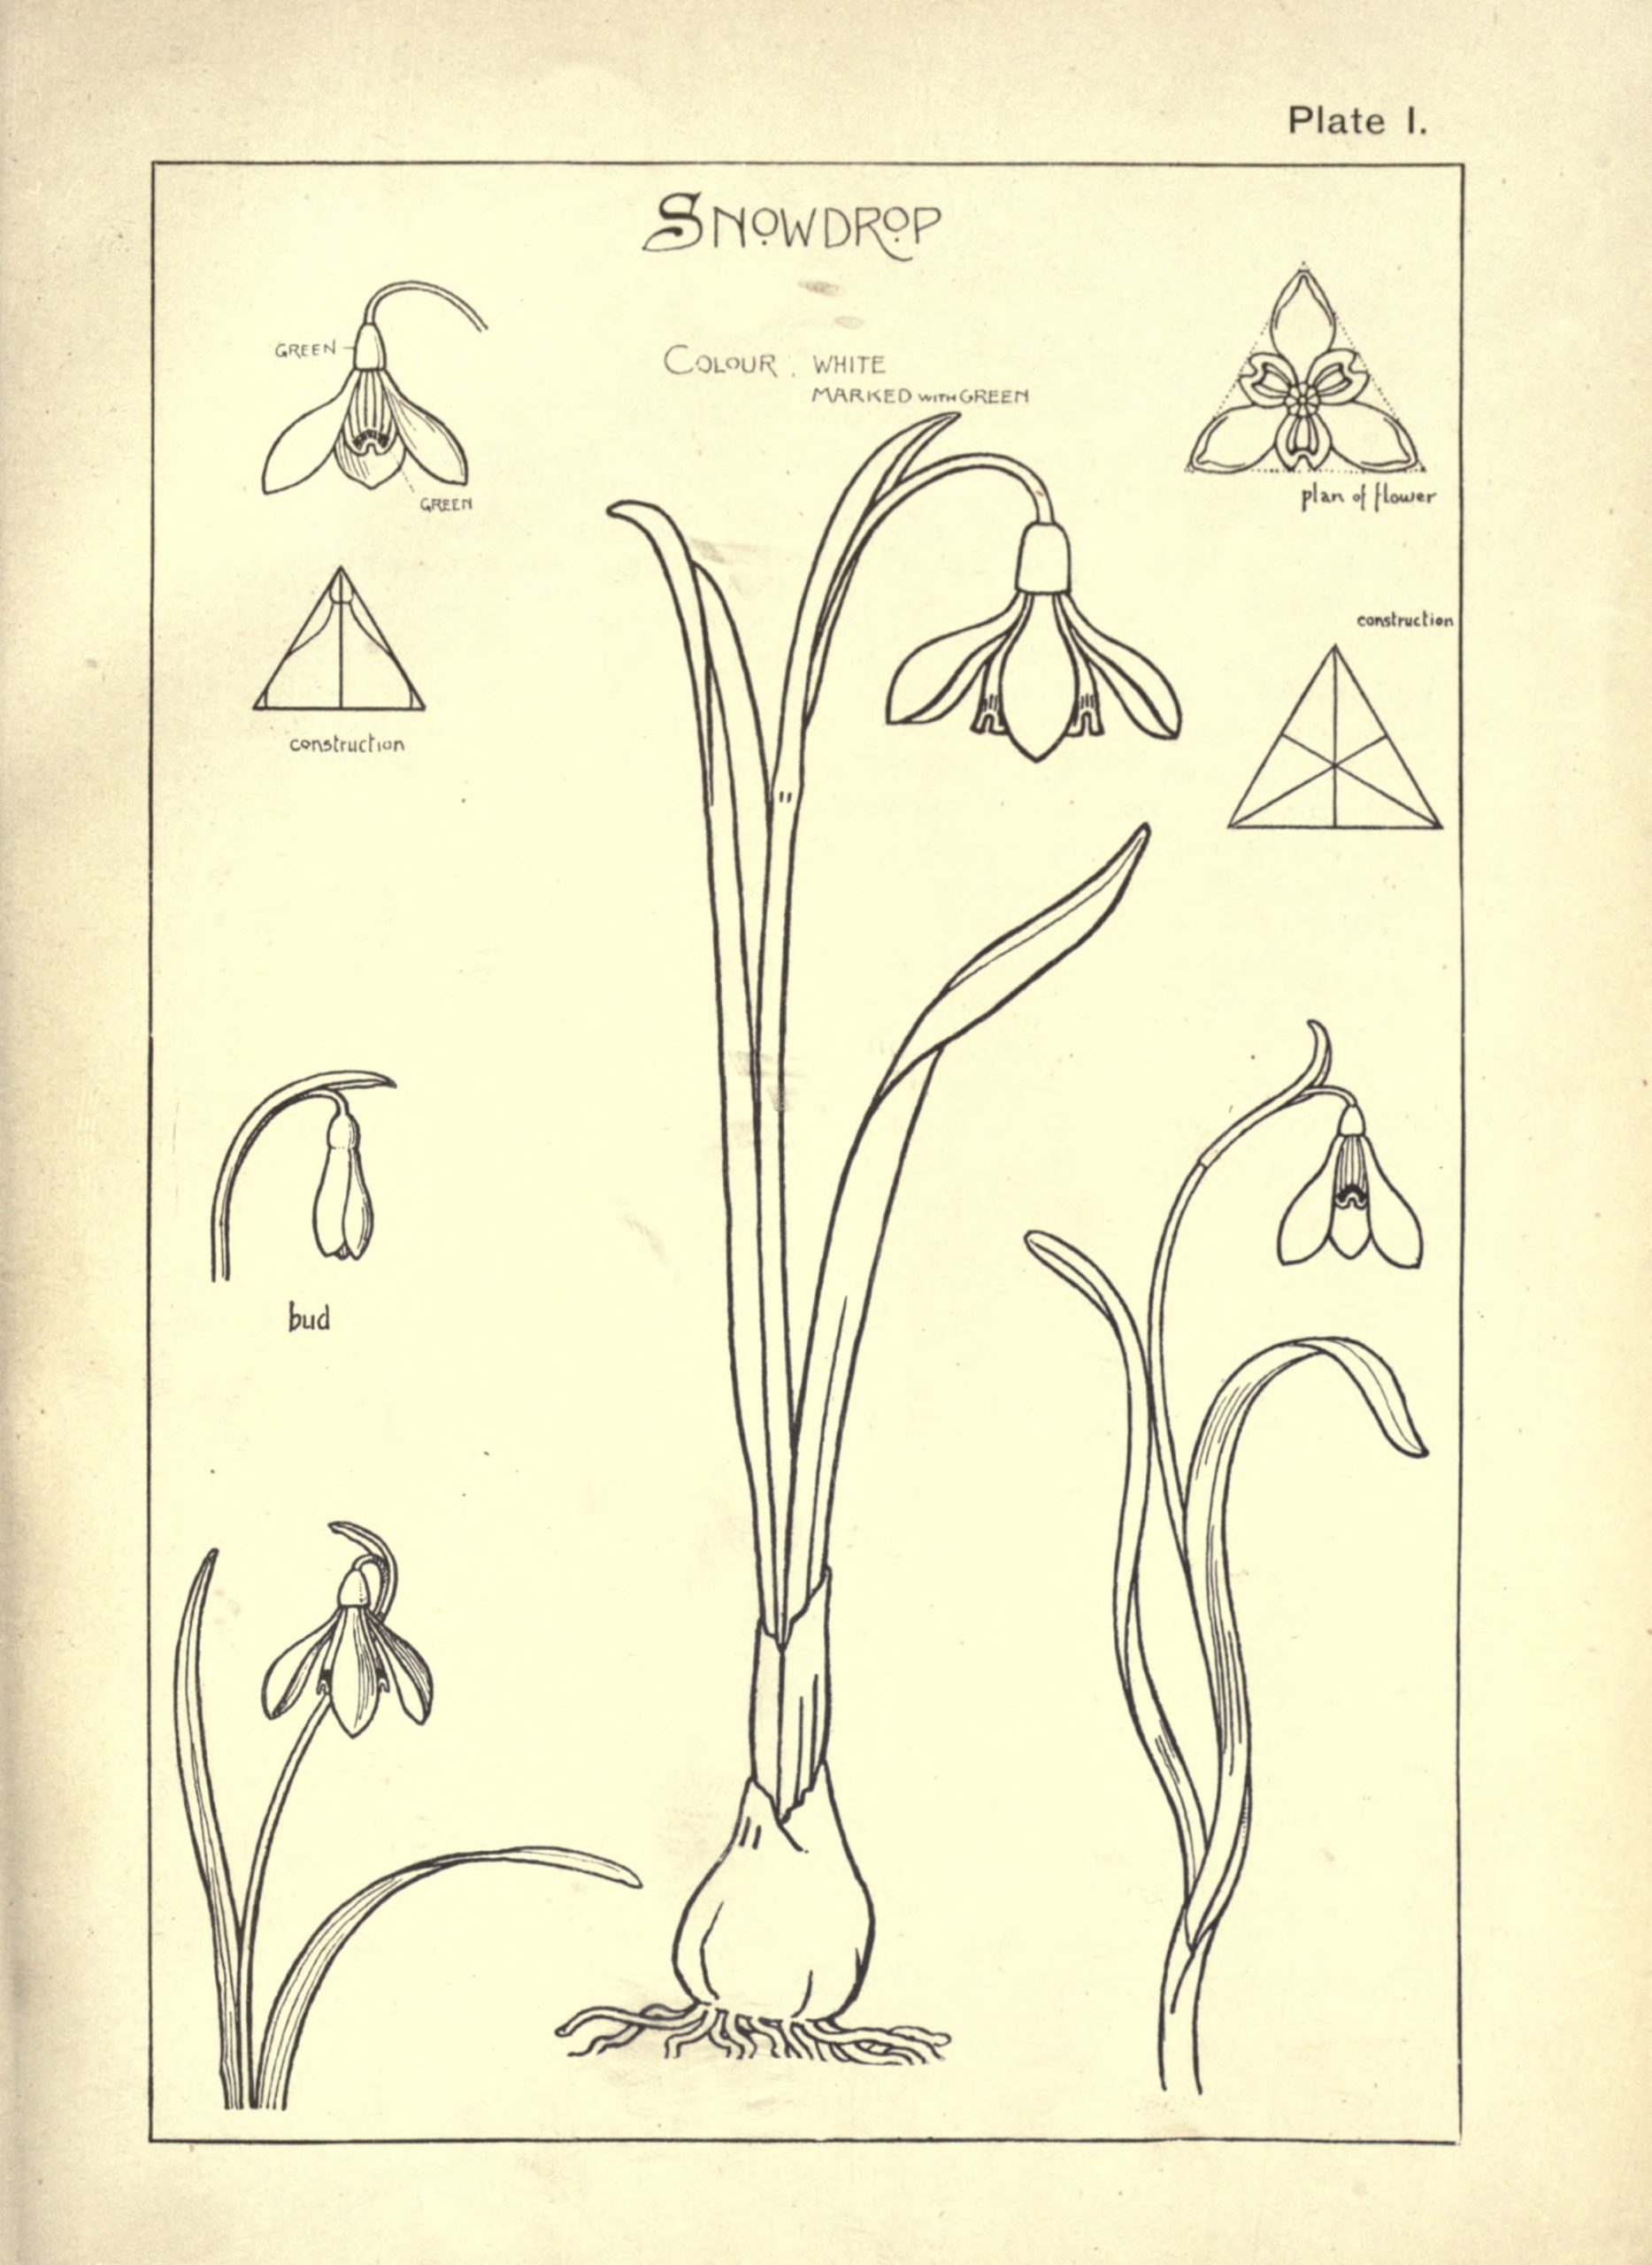 Vintage Botanical Prints - 3 in a series - Nature drawing and design ((1903) by Frank Steeley